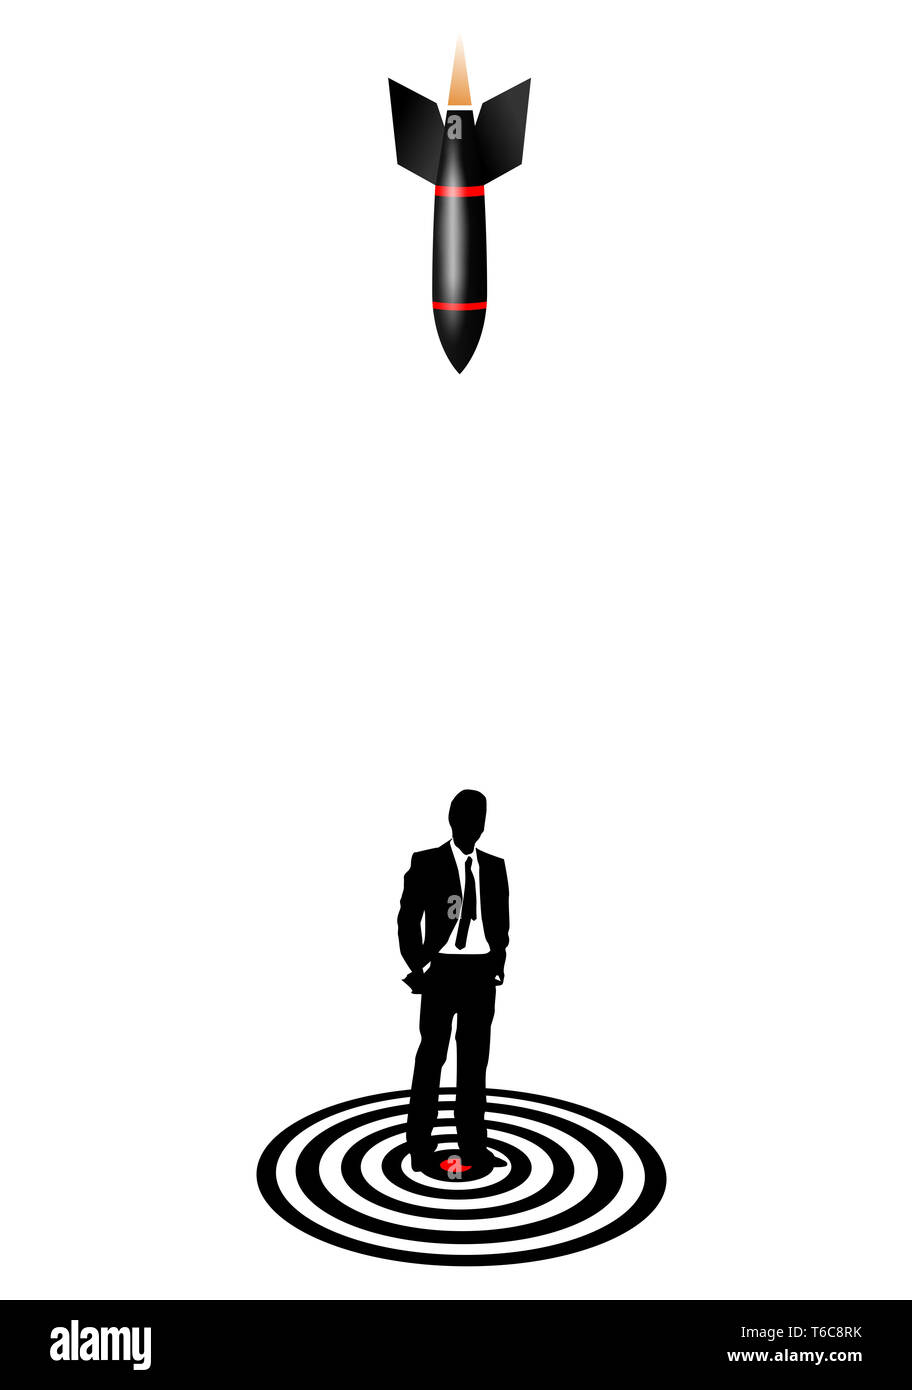 Illustration of a businessman standing on a target in the bulls-eye Stock Photo